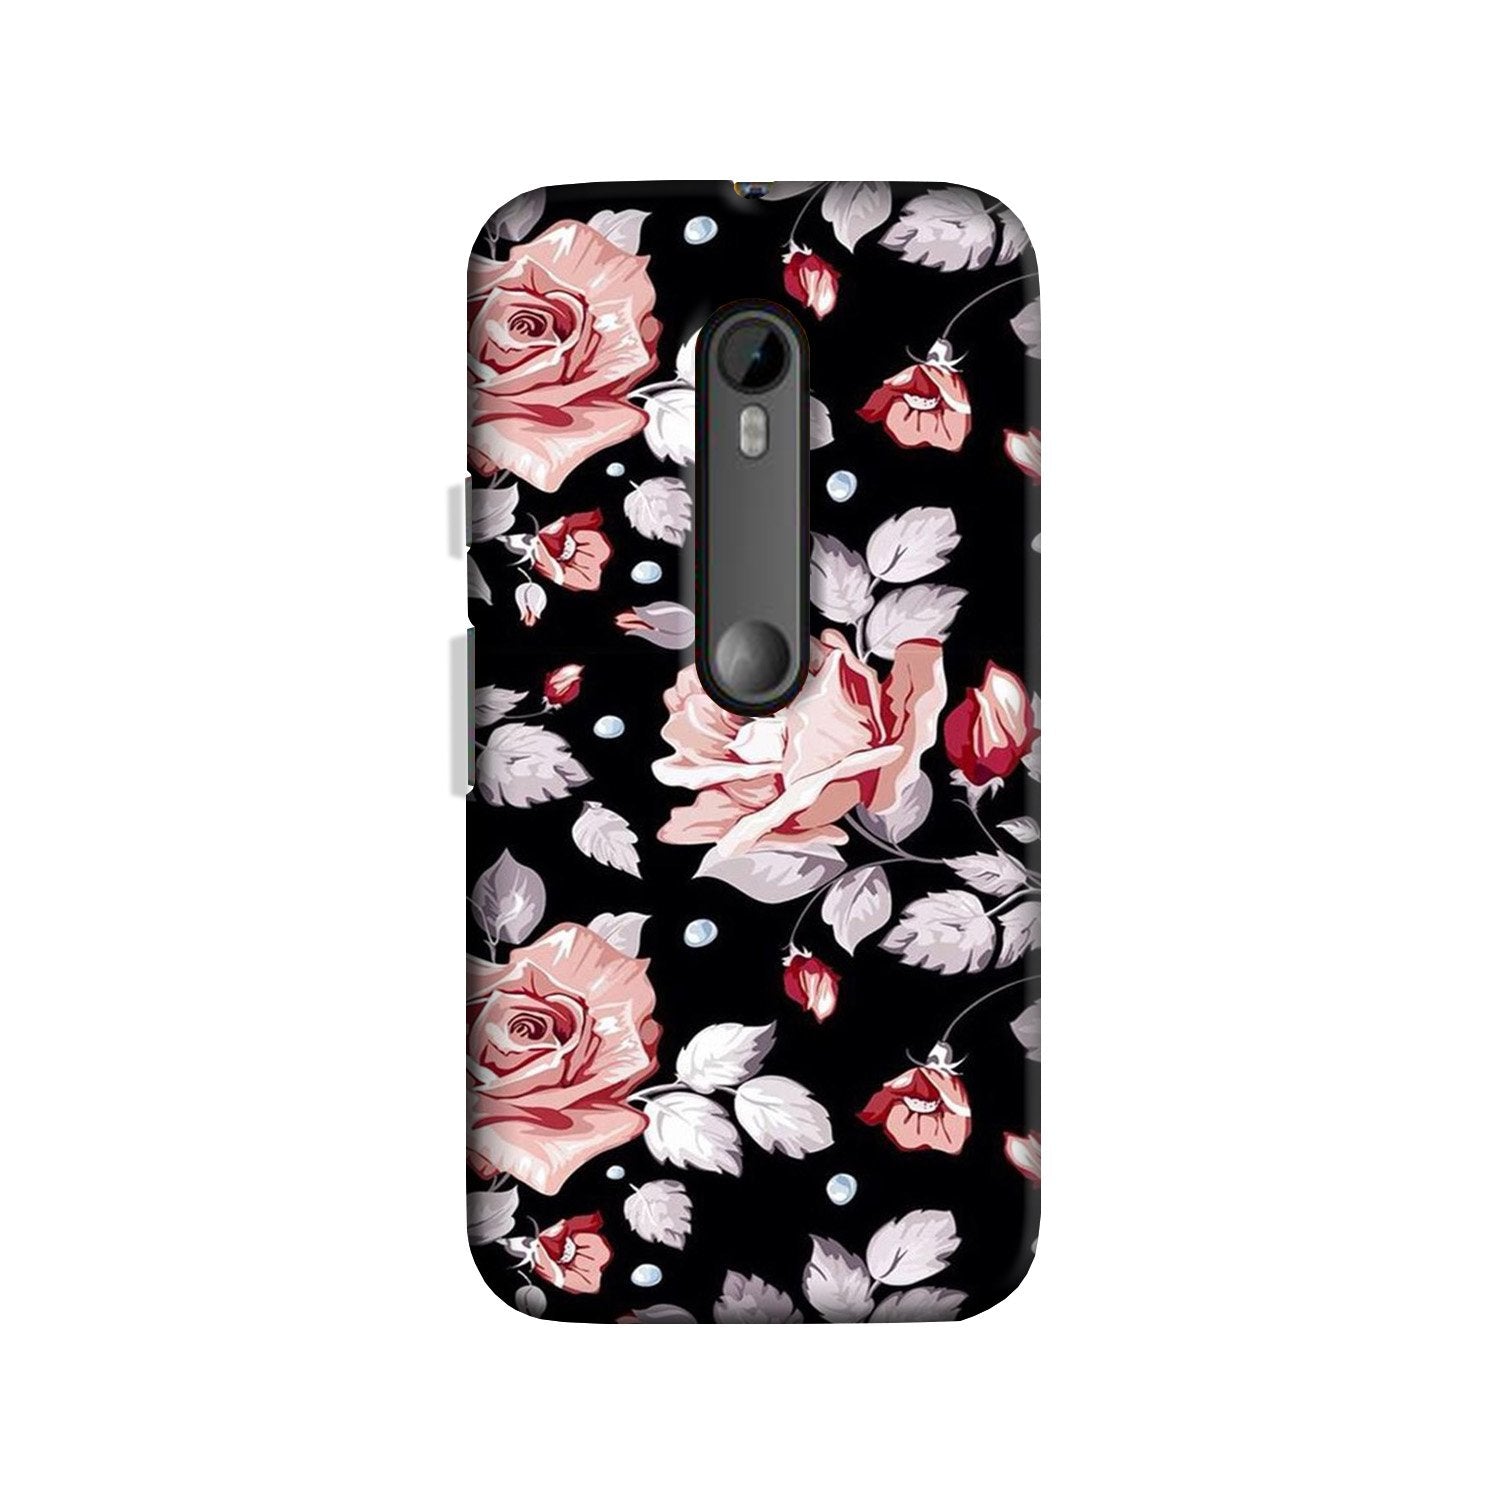 Pink rose Case for Moto X Play